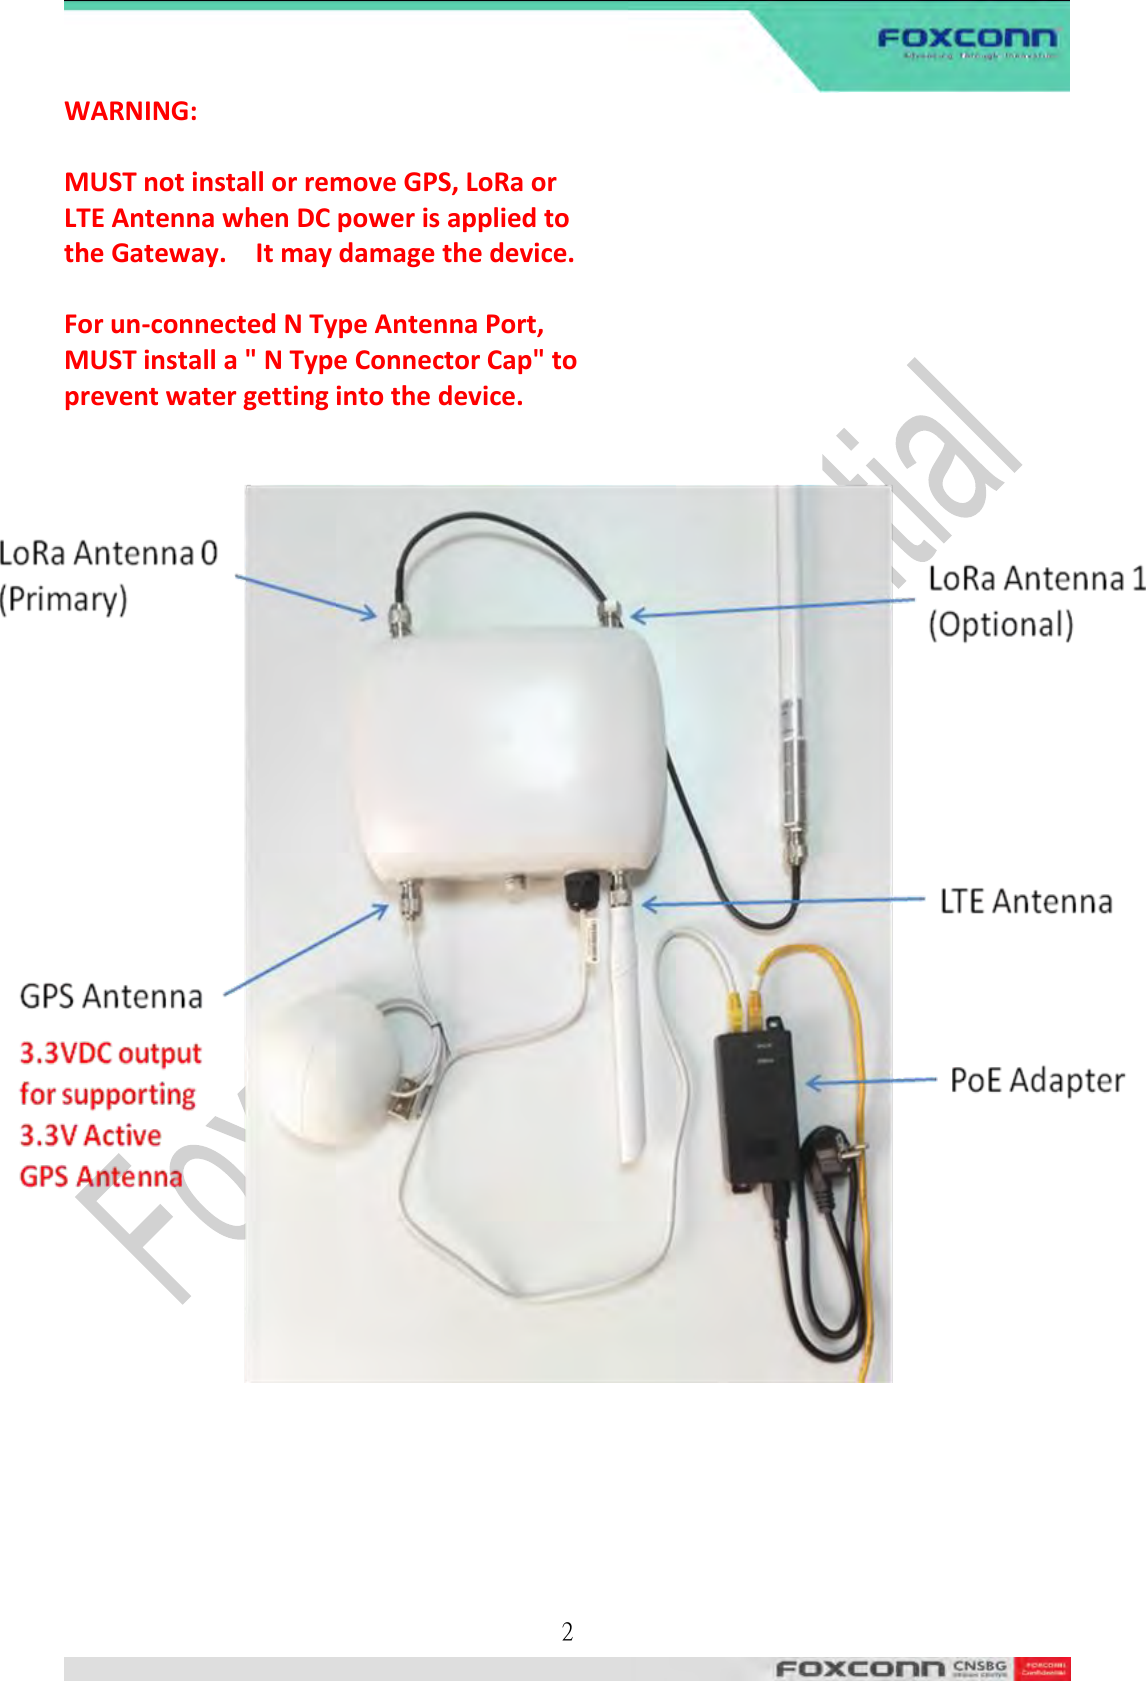  2  WARNING:  MUST not install or remove GPS, LoRa or LTE Antenna when DC power is applied to the Gateway.    It may damage the device.  For un-connected N Type Antenna Port, MUST install a &quot; N Type Connector Cap&quot; to prevent water getting into the device.             